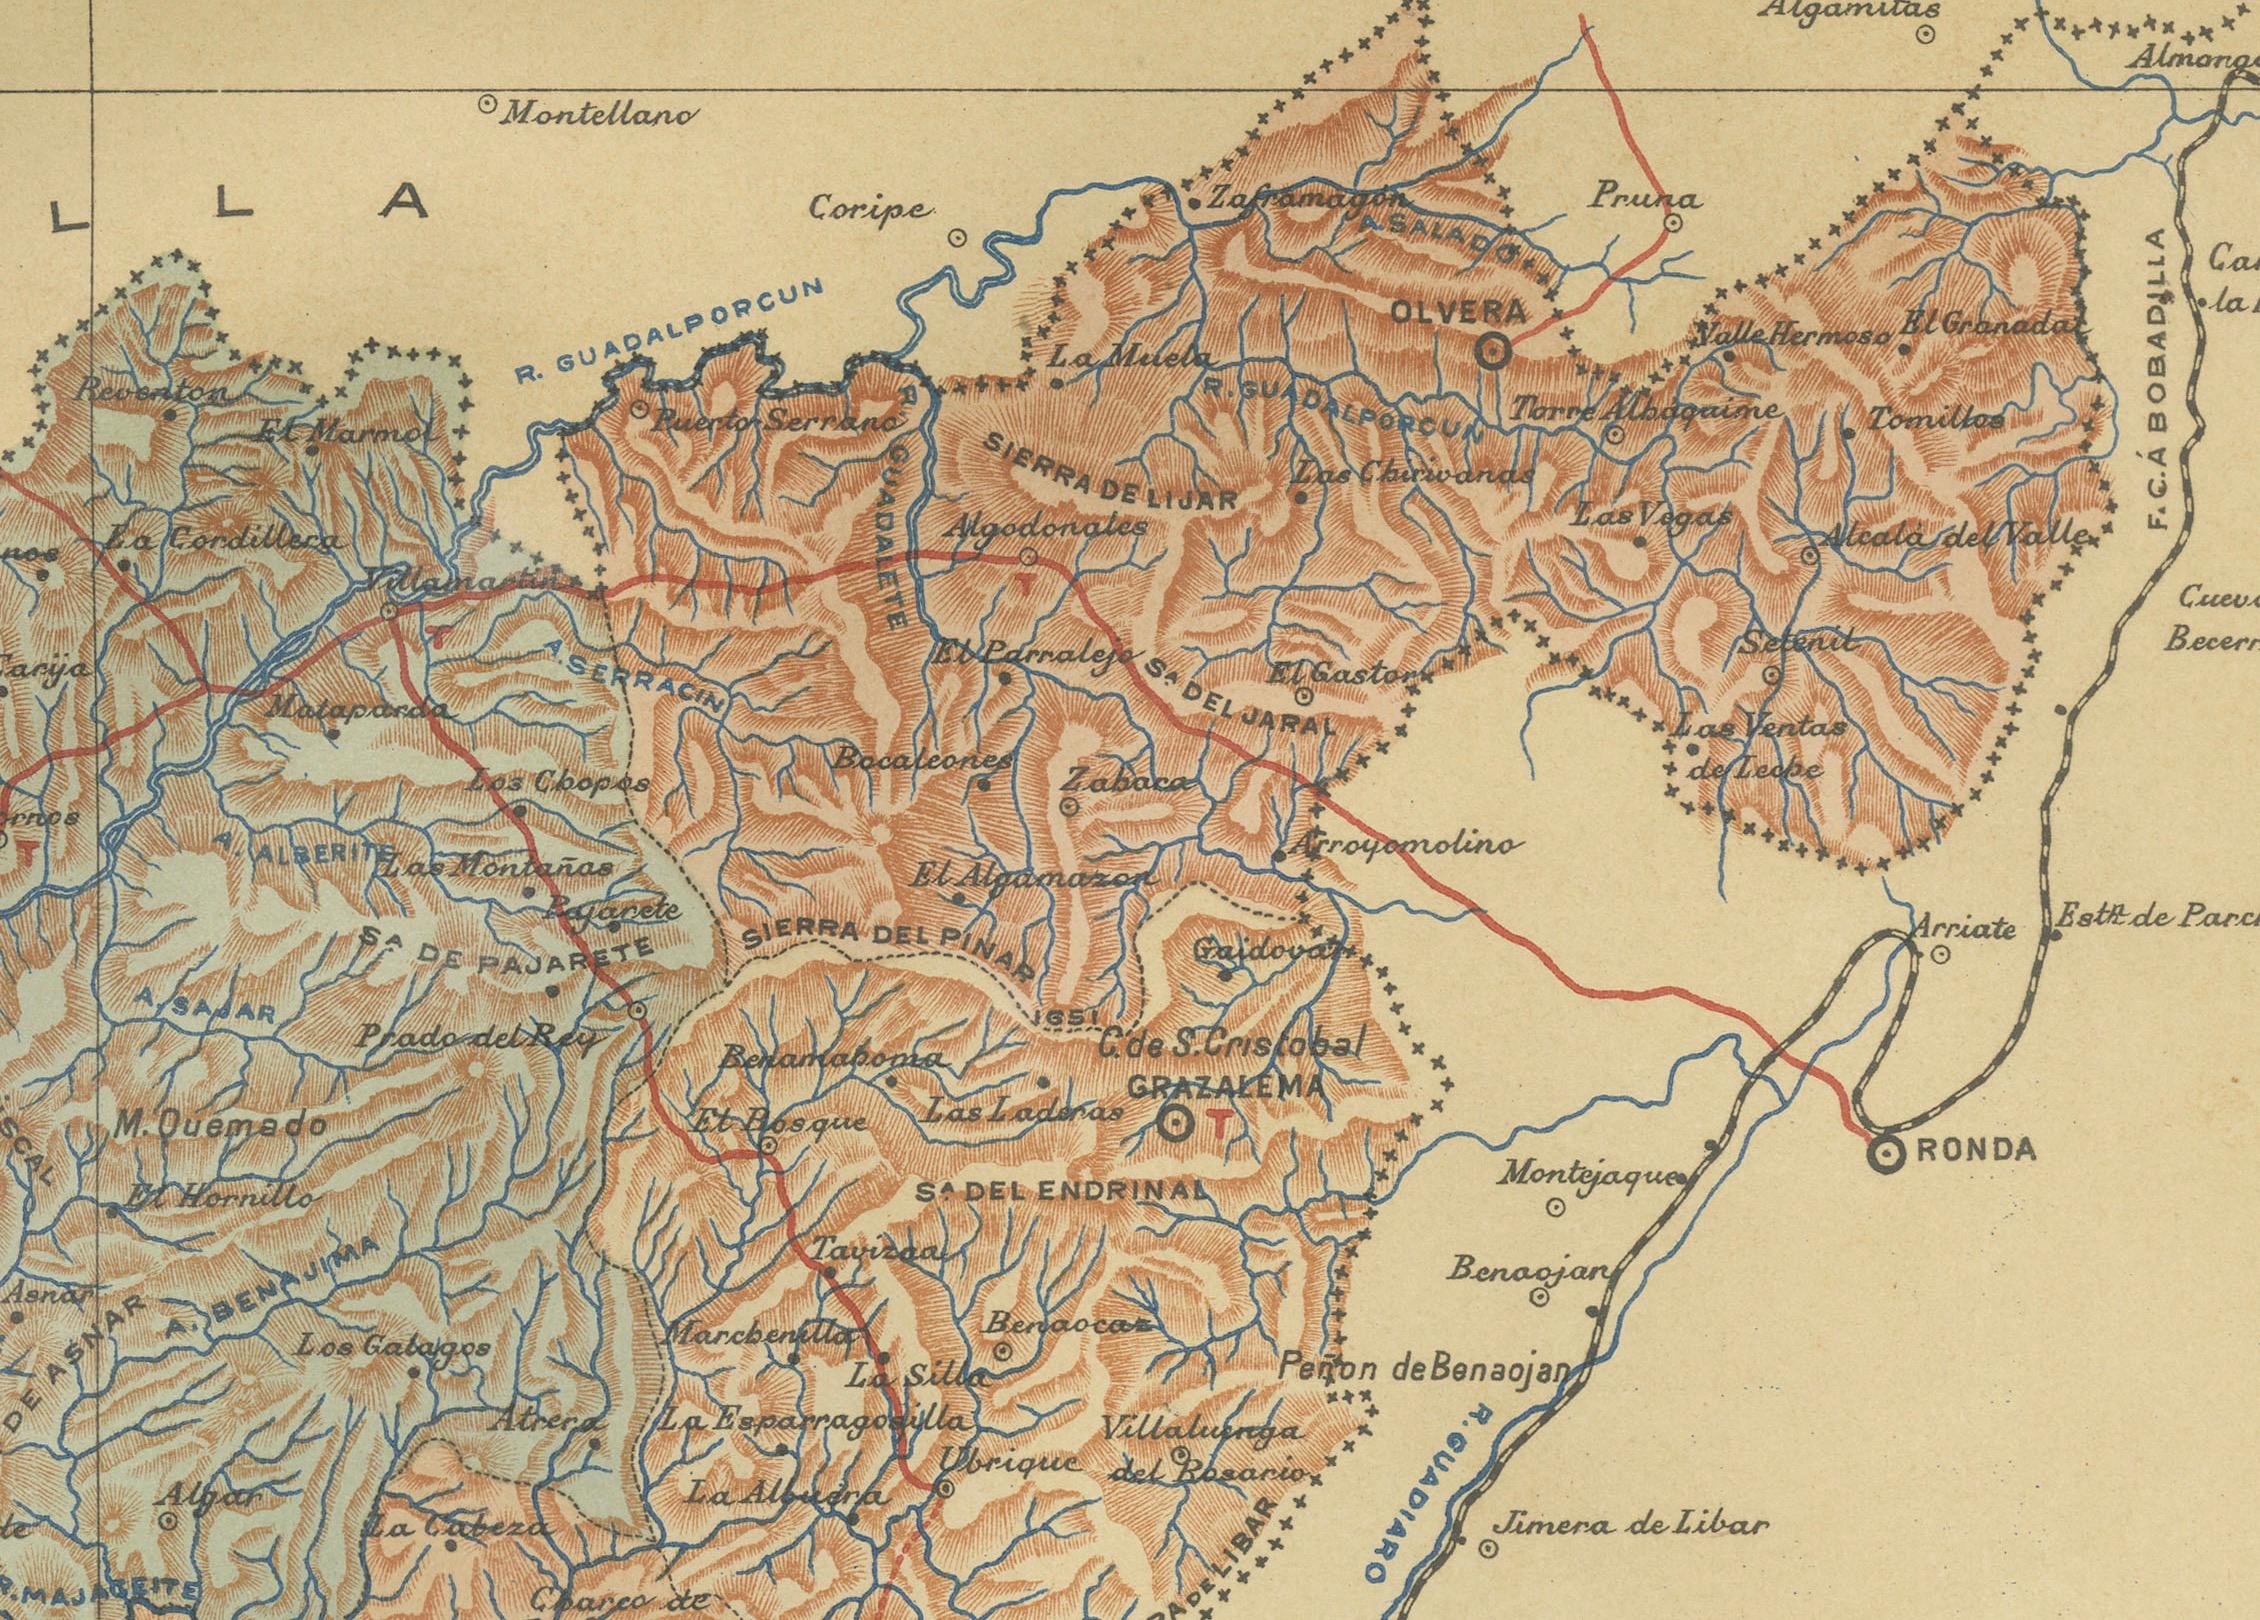 The map illustrates the province of Cádiz, located in the autonomous community of Andalusia, Spain, from the year 1901. It displays various geographic and man-made features:

The map depicts the varied landscape of Cádiz, including the mountainous